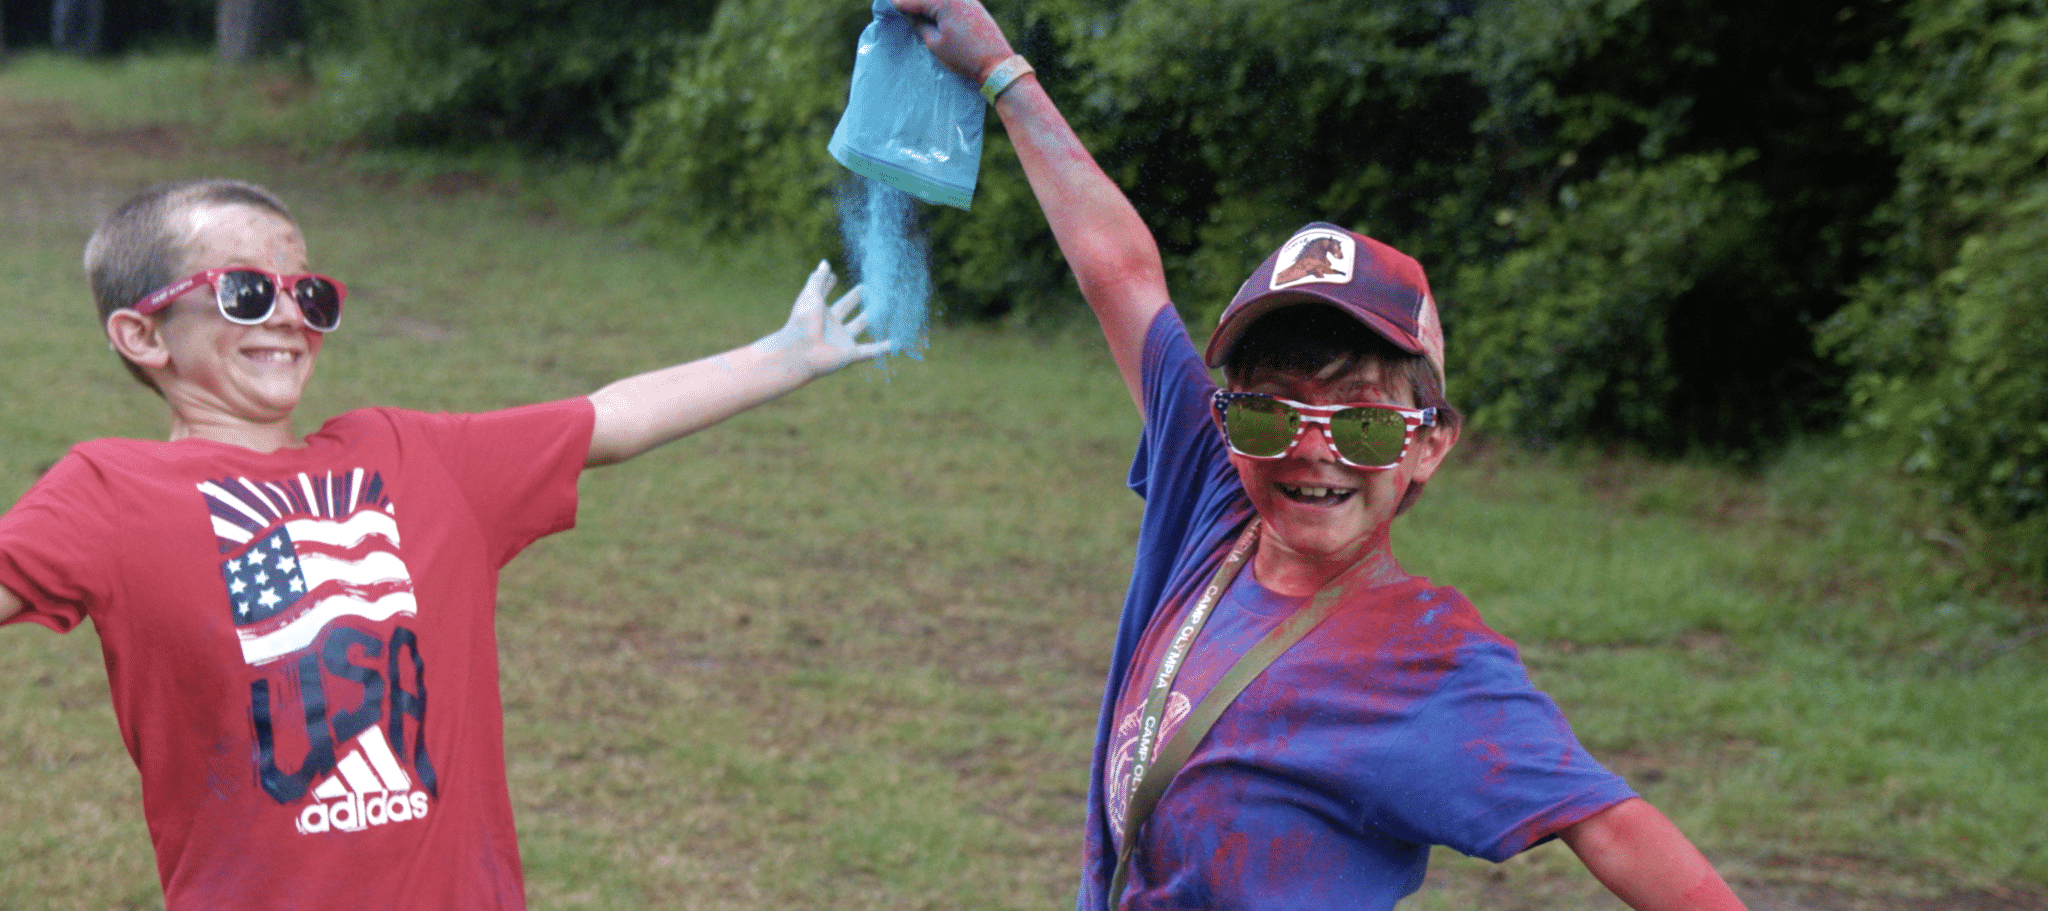 two boys having fun with color chalk for the fourth of july summer camp celebration